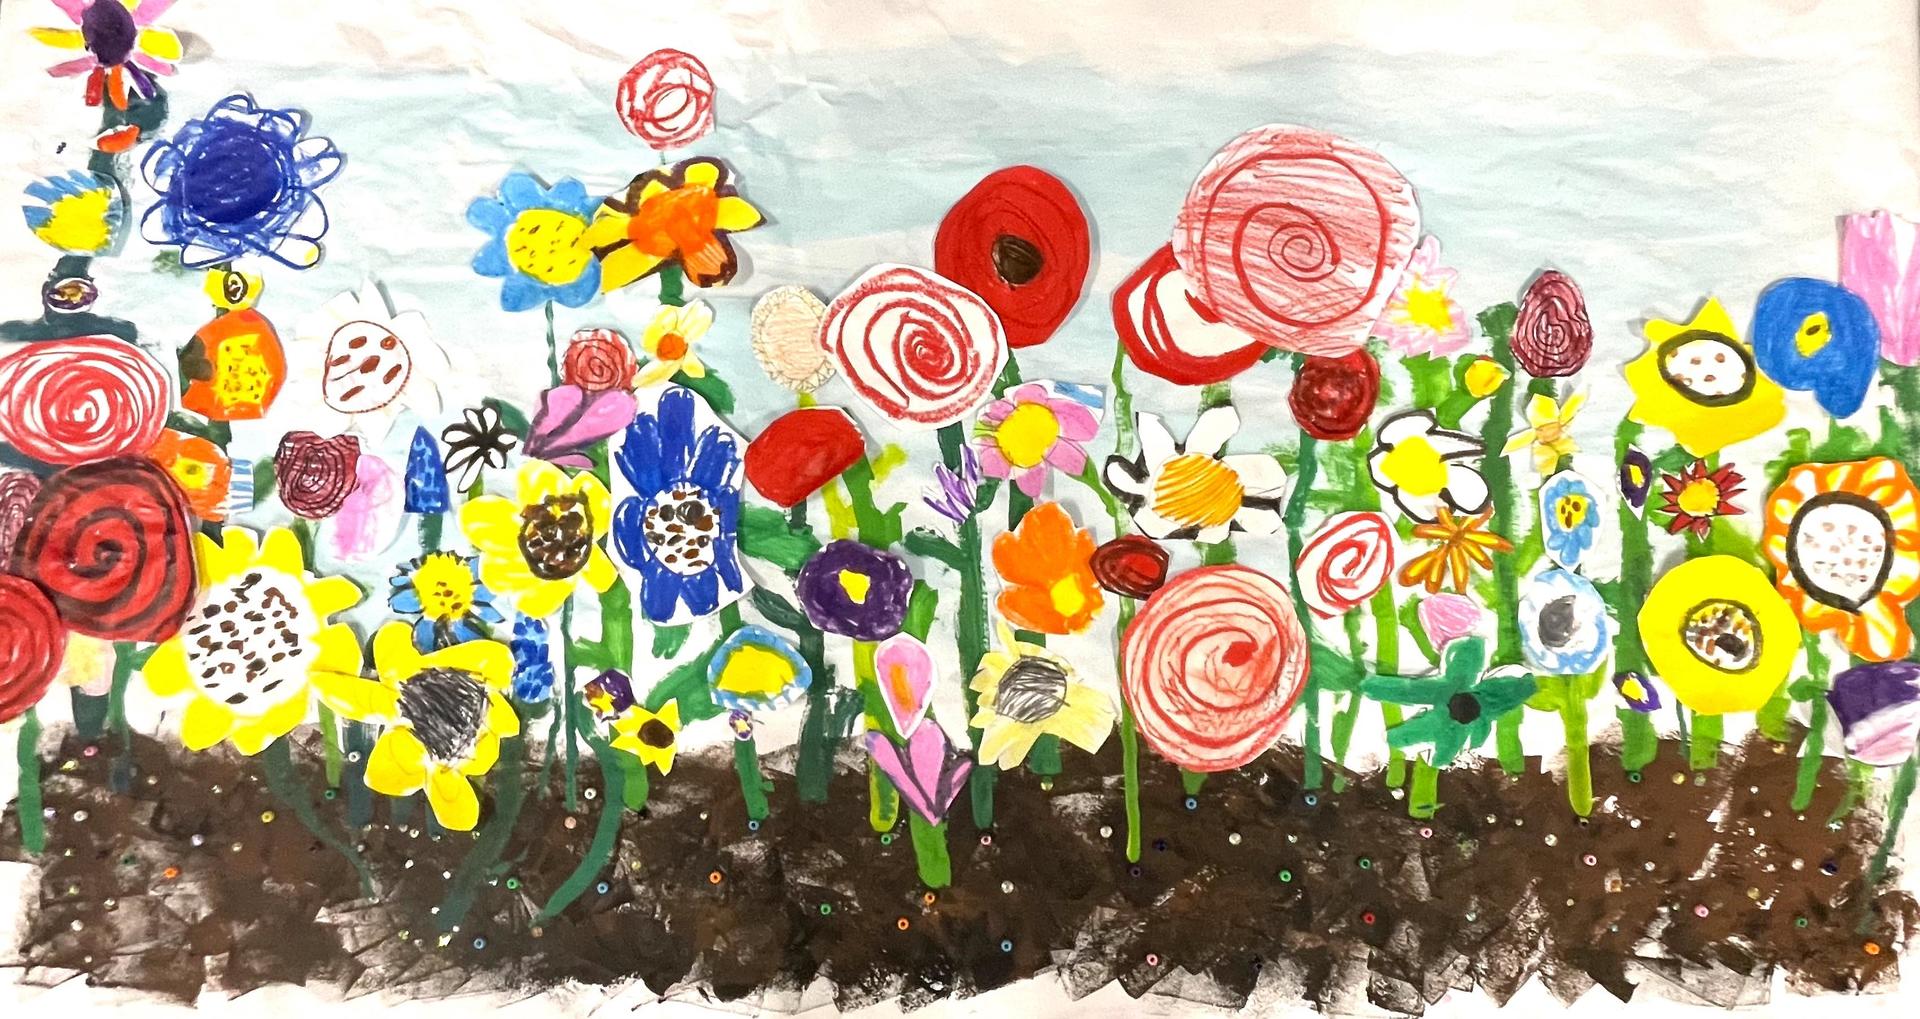 Grade 1, Quidnessett Elementary School “Growing Gardens Mural Project”  Students explore phases of plant life and demonstrate great teamwork!